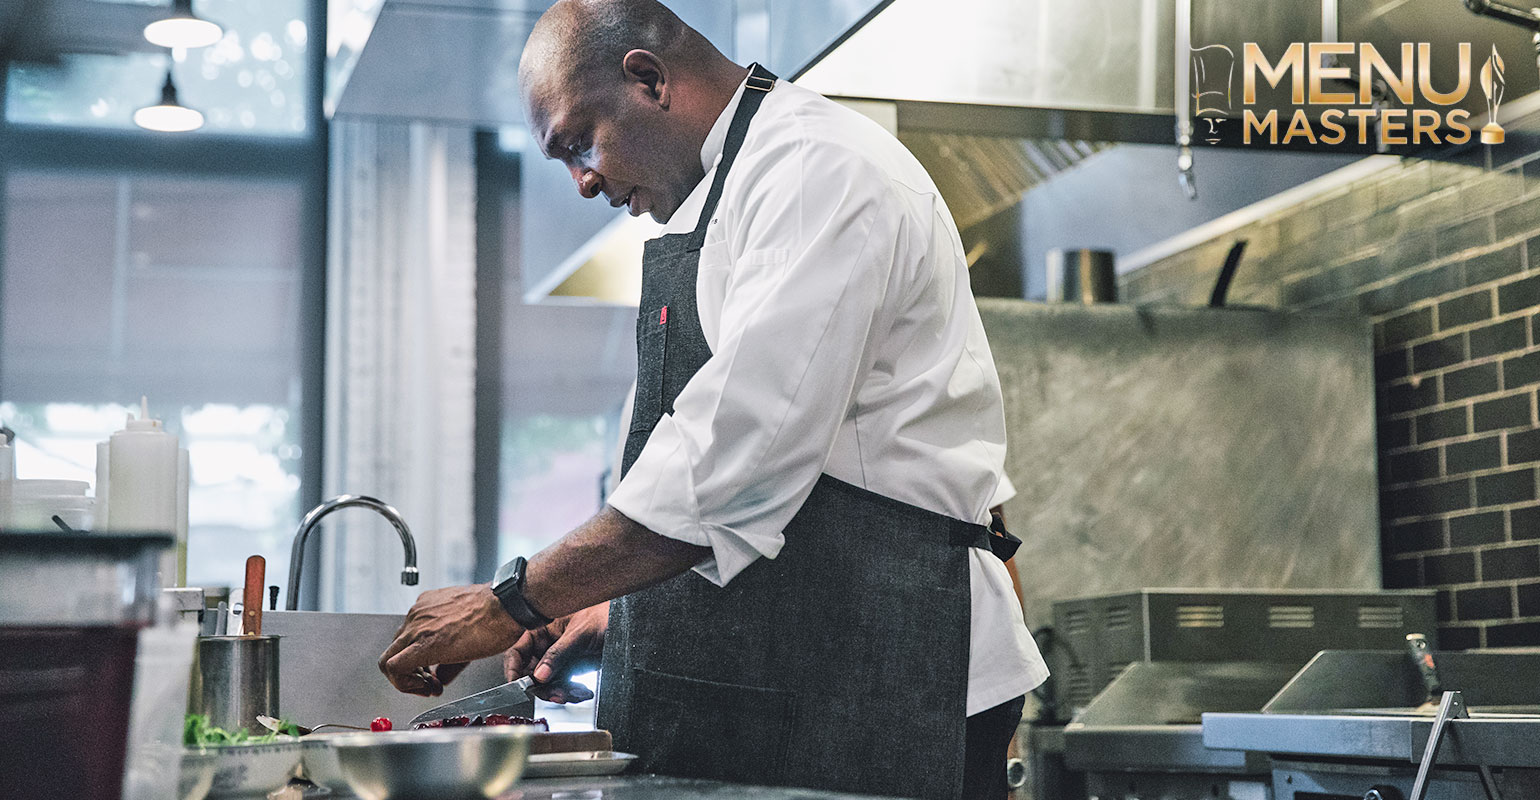 Chef/Restaurateur Erick Williams Keeps Virtue at the Center